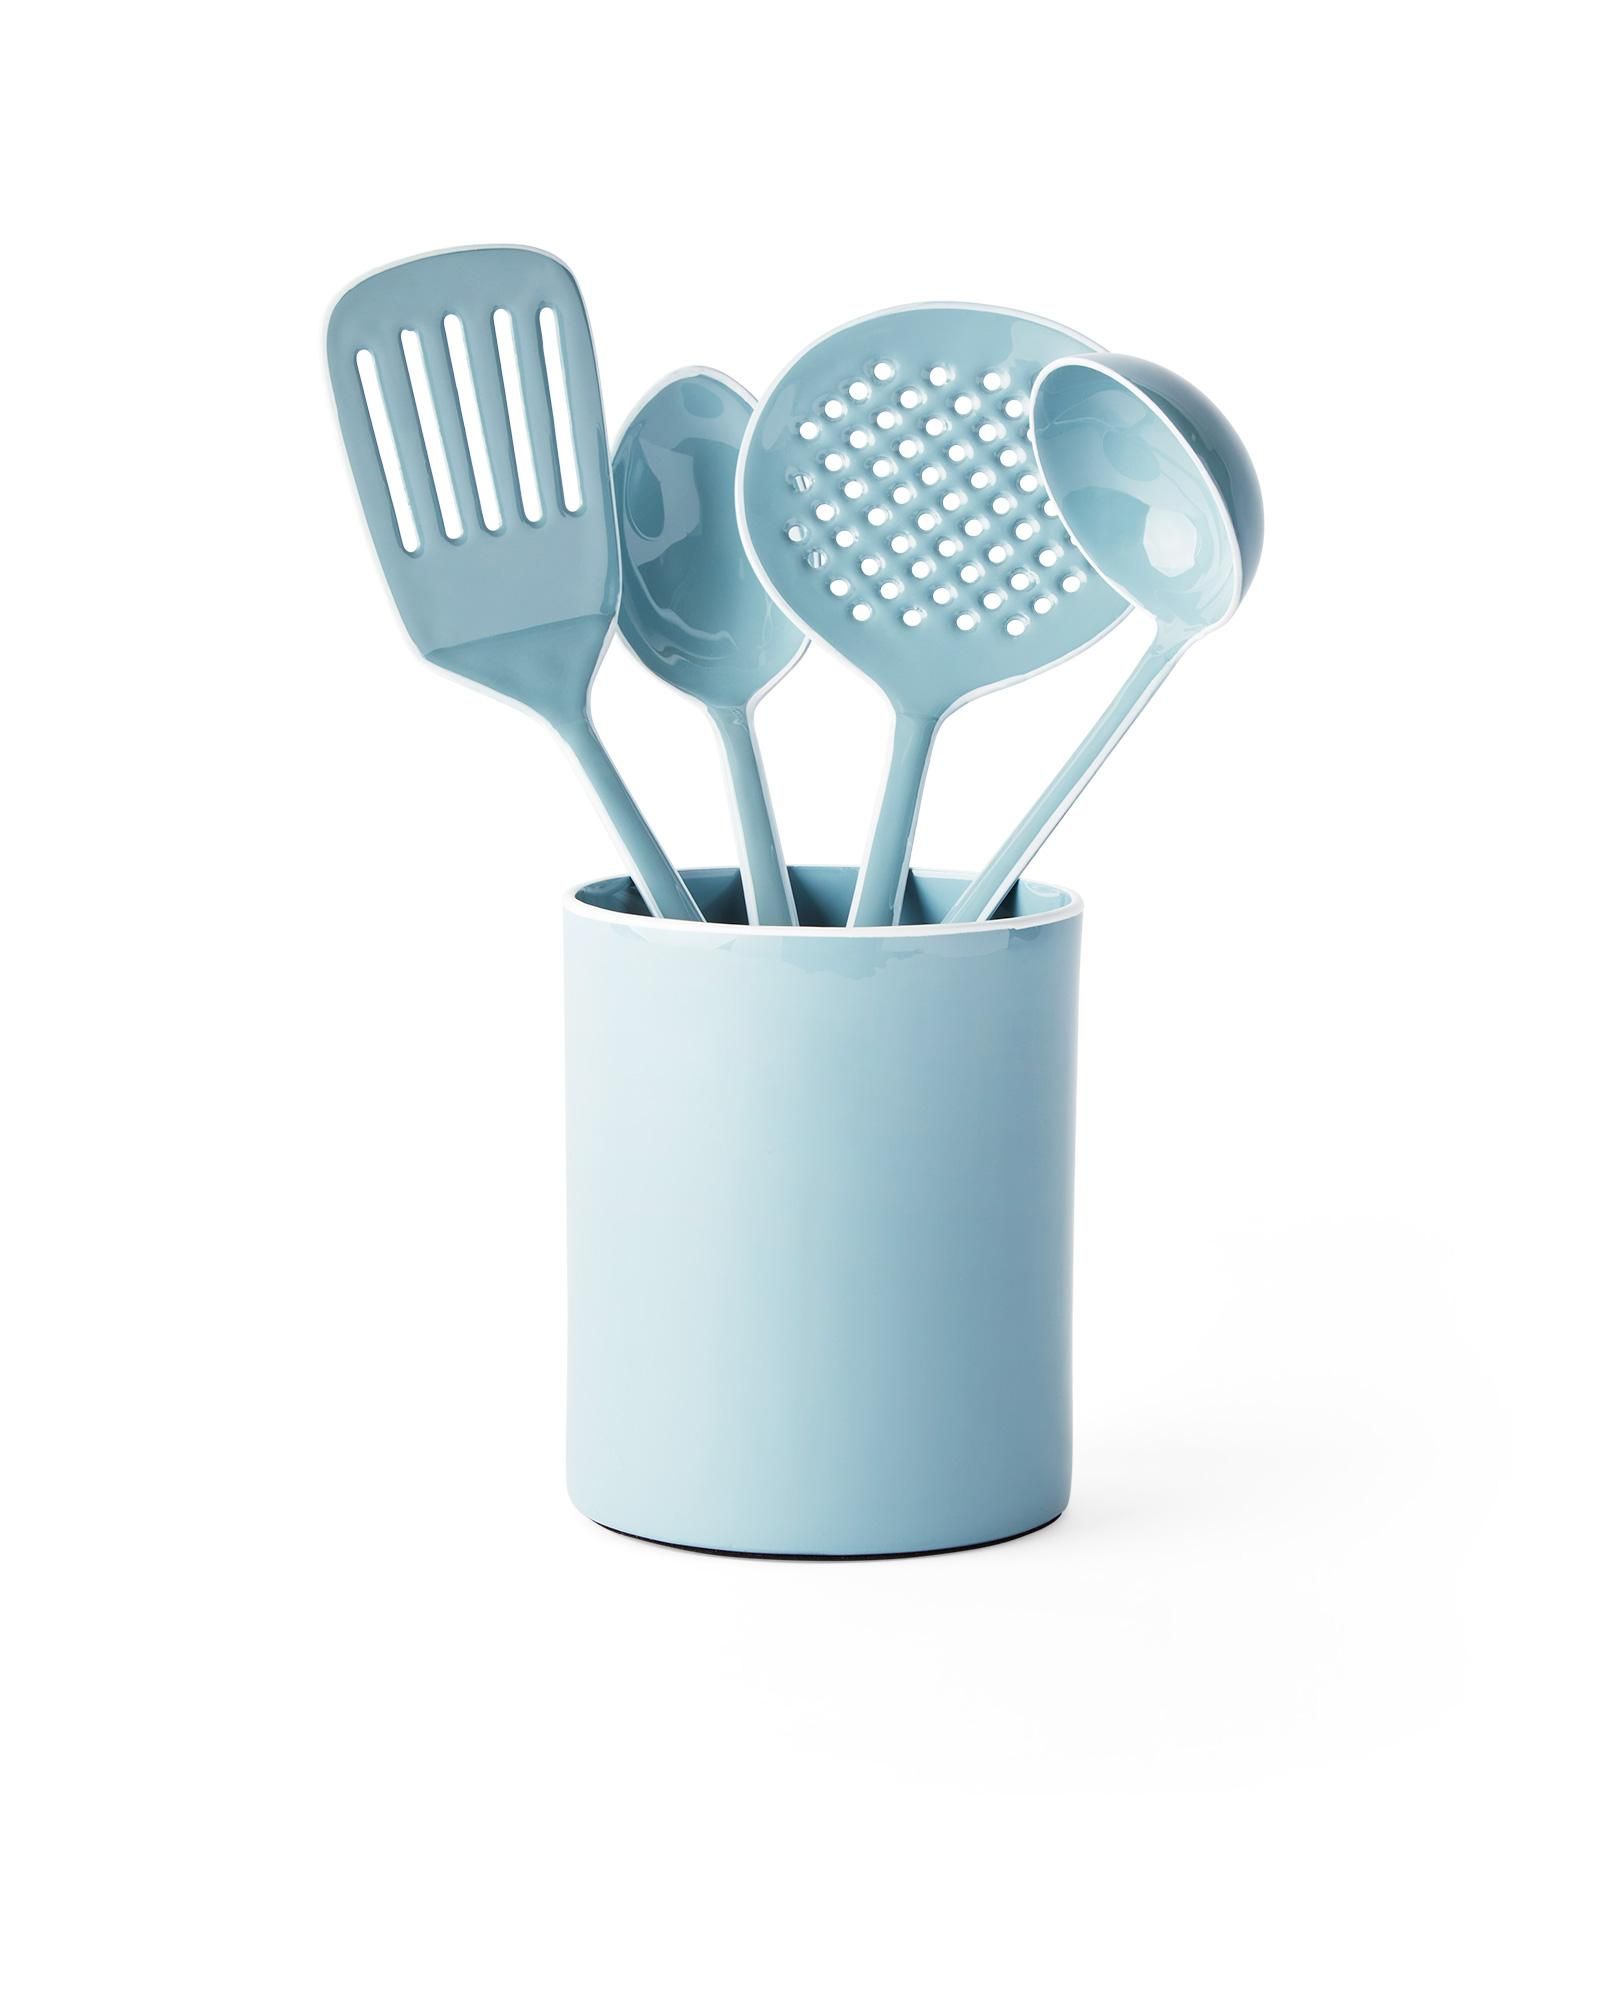 Maison Cooking Utensil Set | Serena and Lily